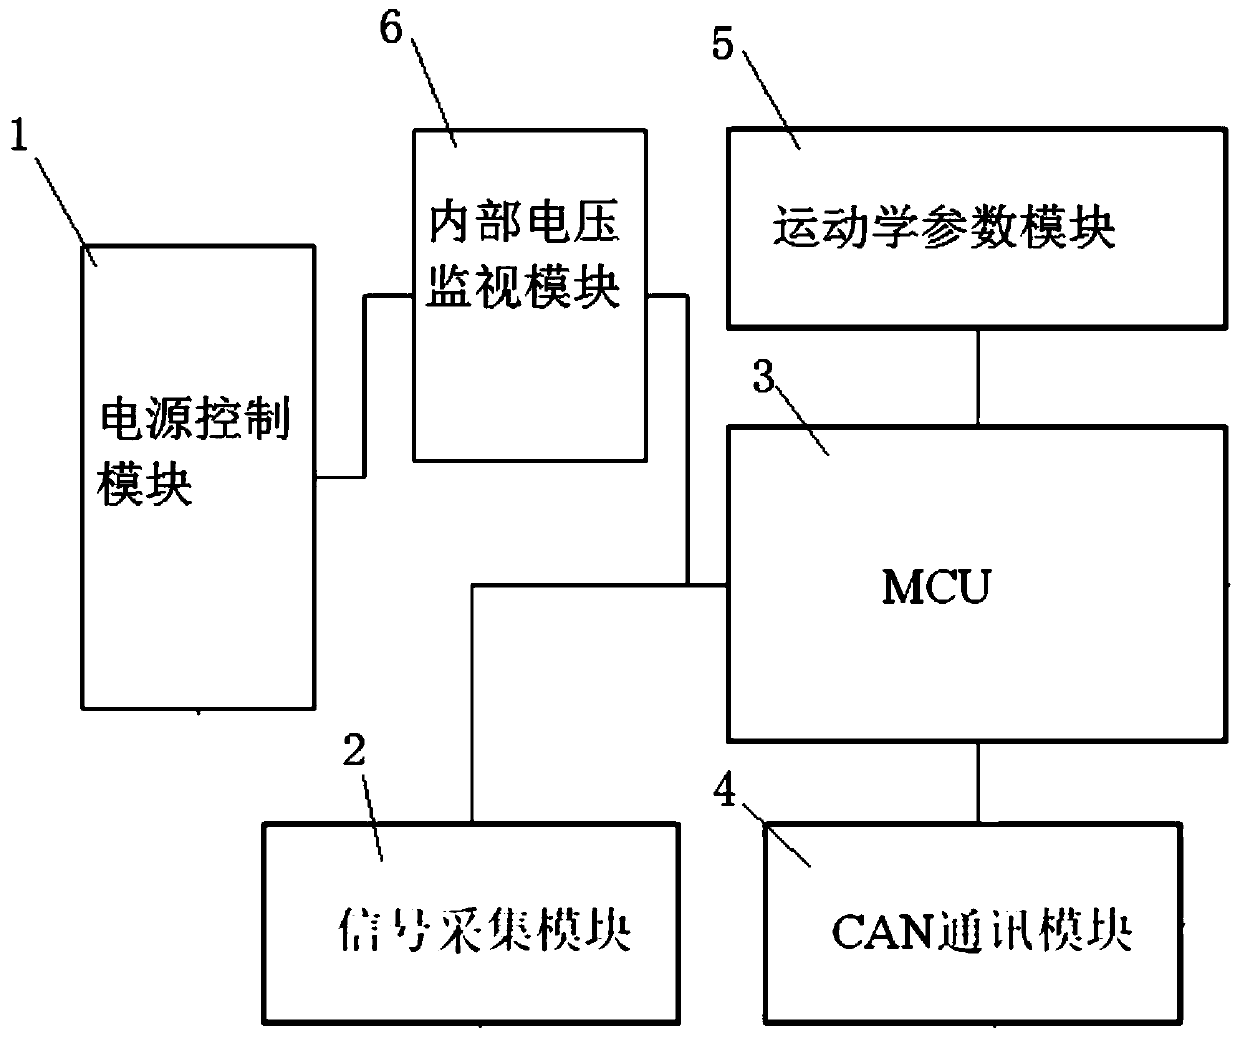 Two-wheeled hub motor driven pure electric vehicle controller and control method